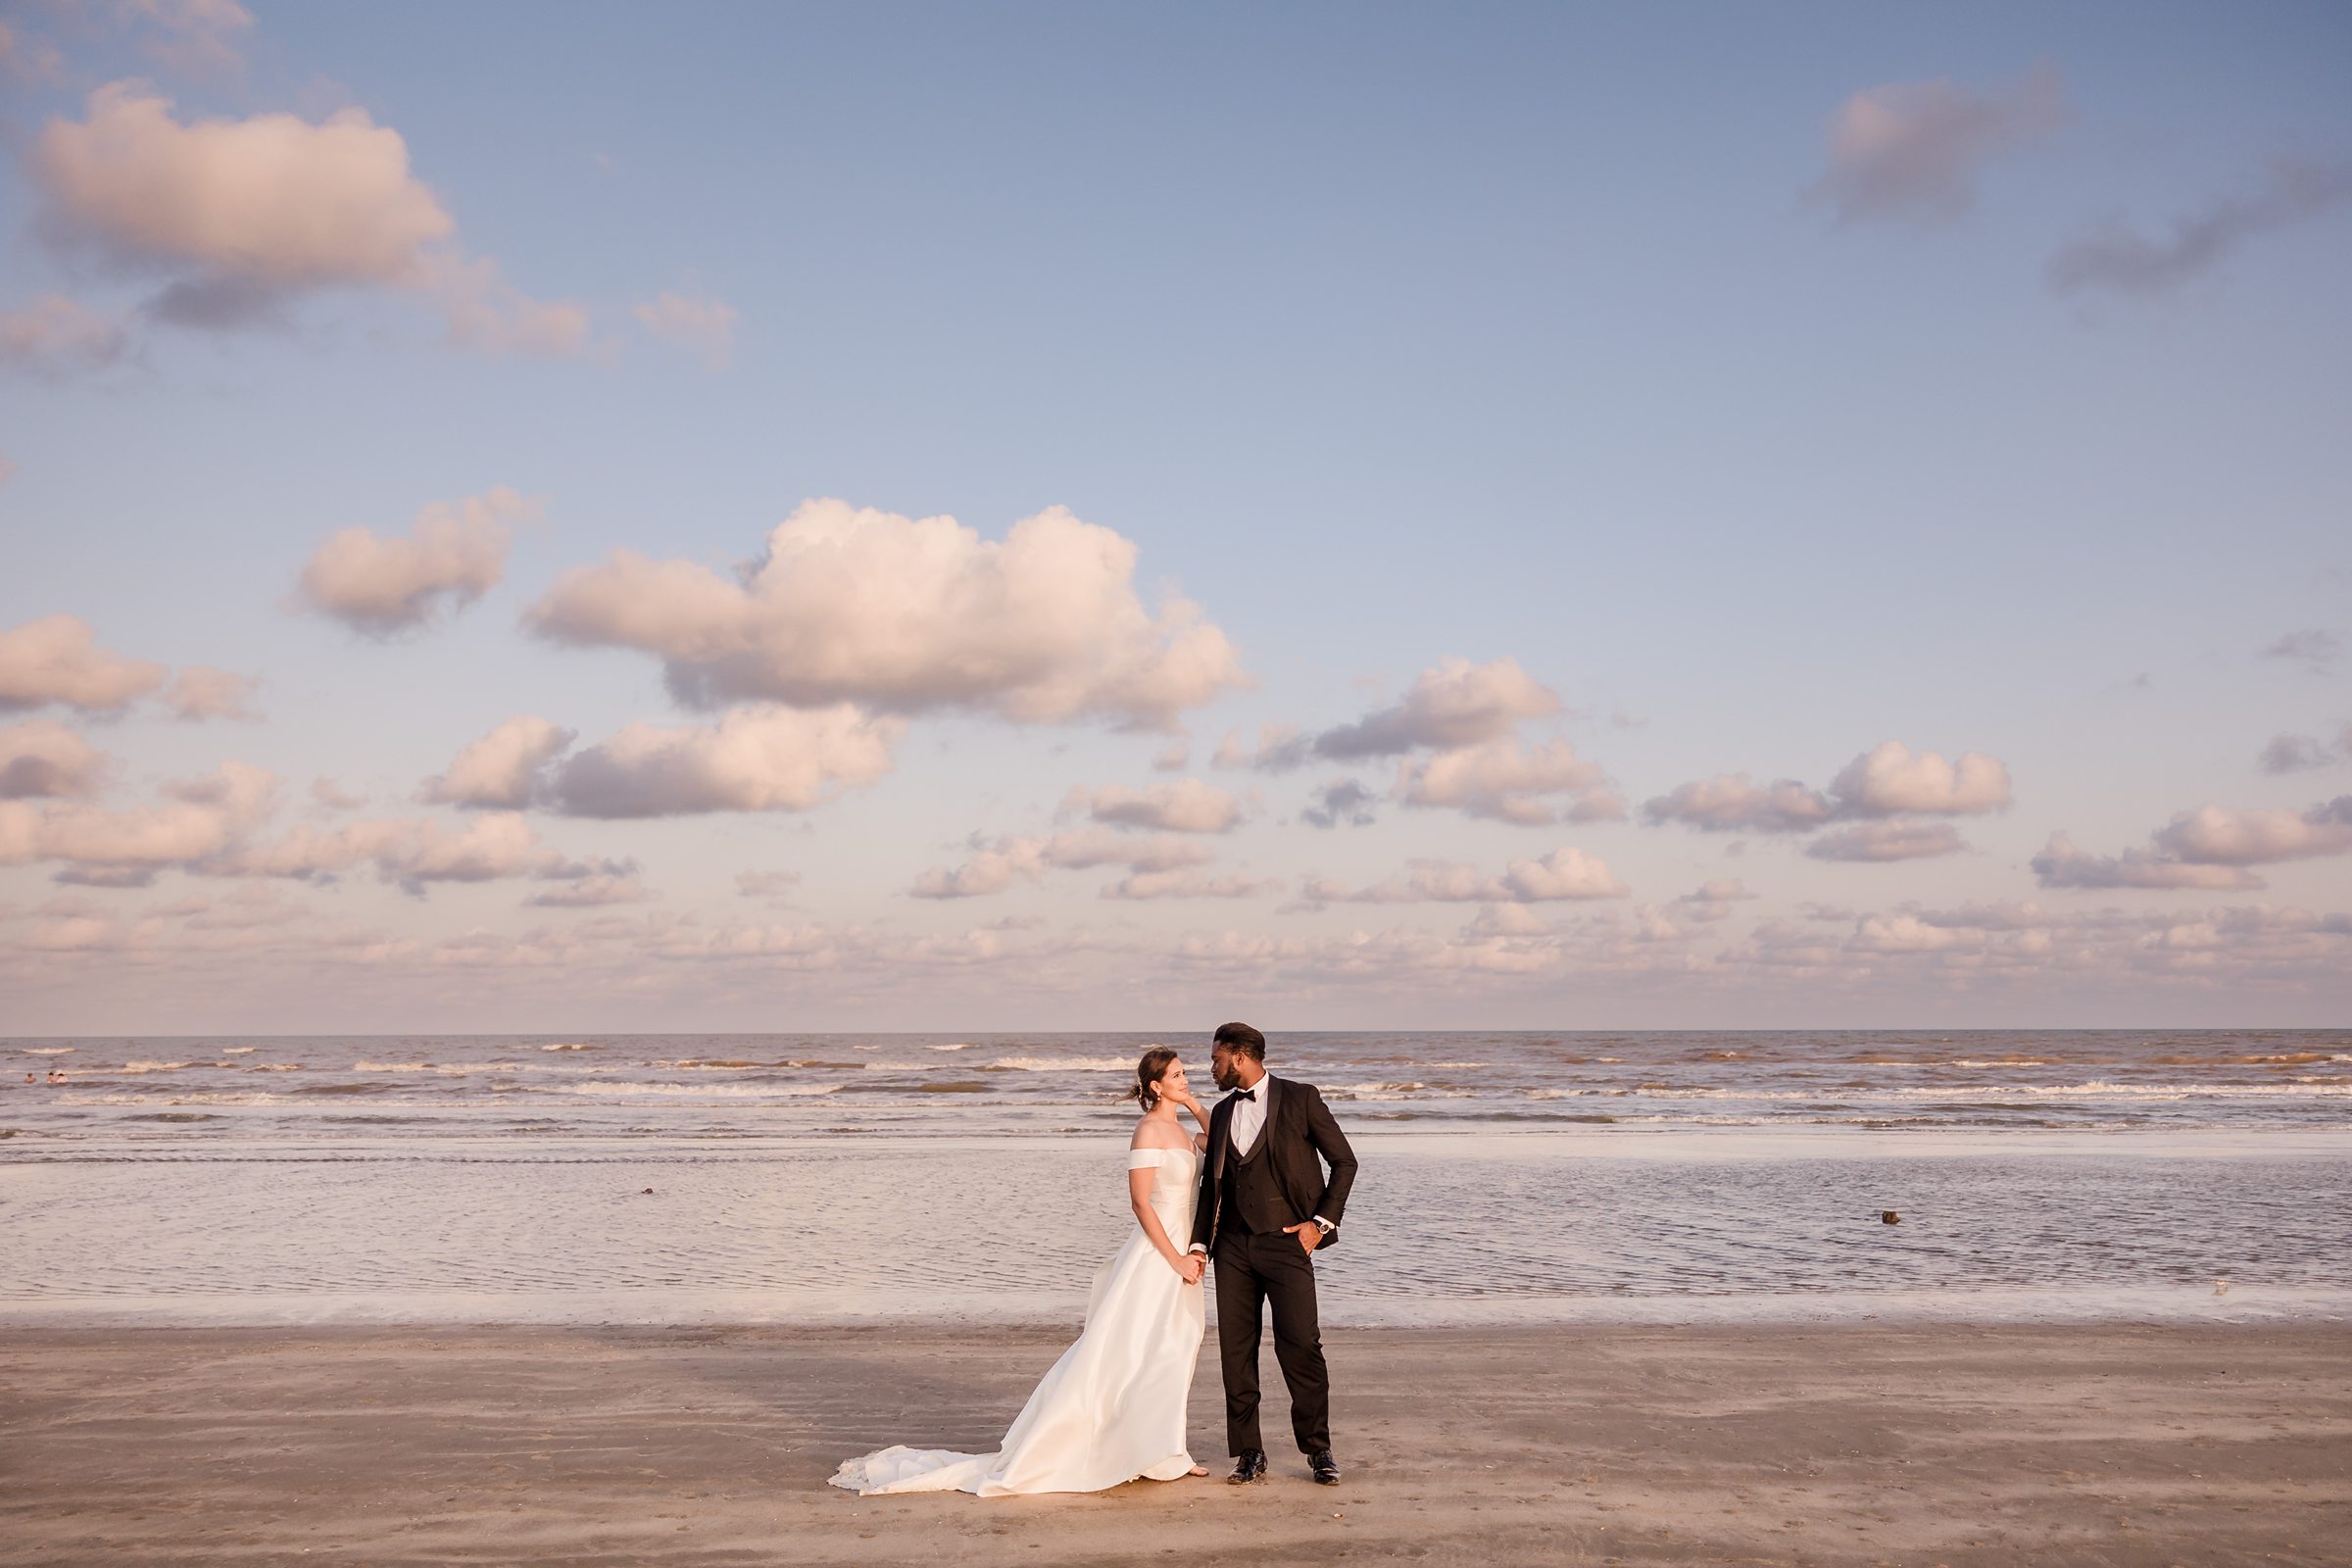 Bride and Groom Embrace during an elopement in Galveston Beach, Texas